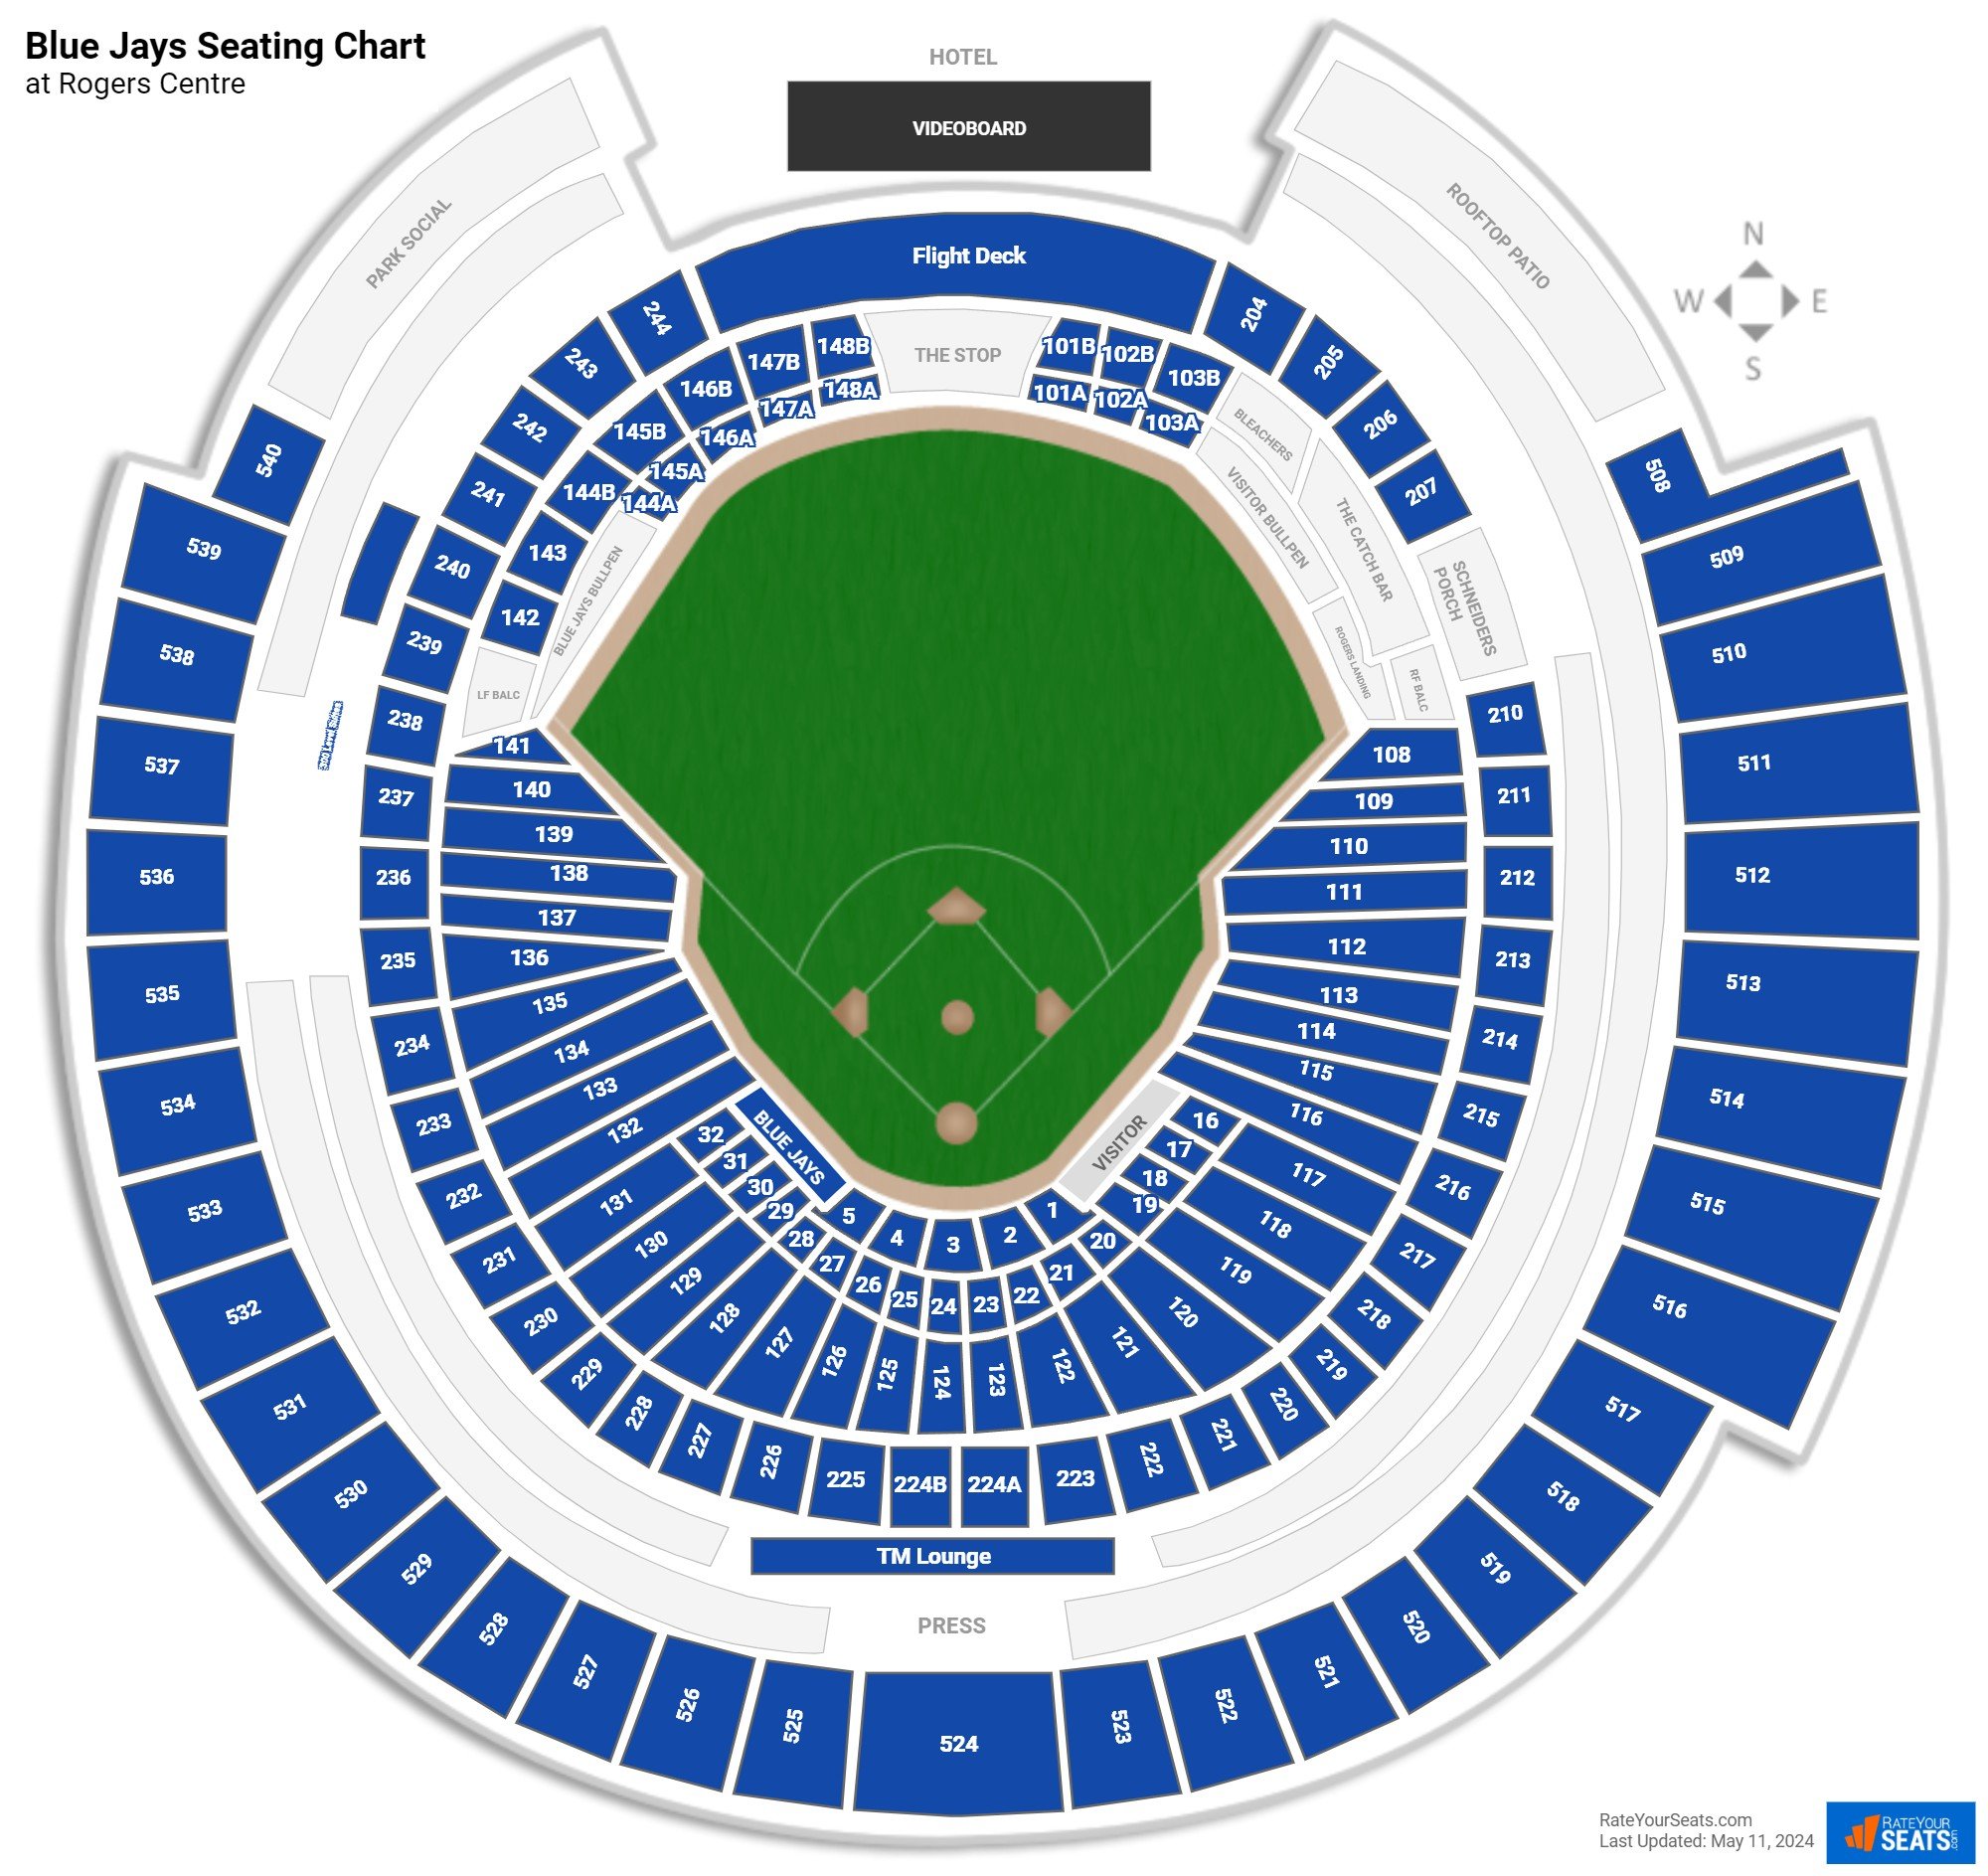 Blue Jays Seating Chart At Rogers Centre 